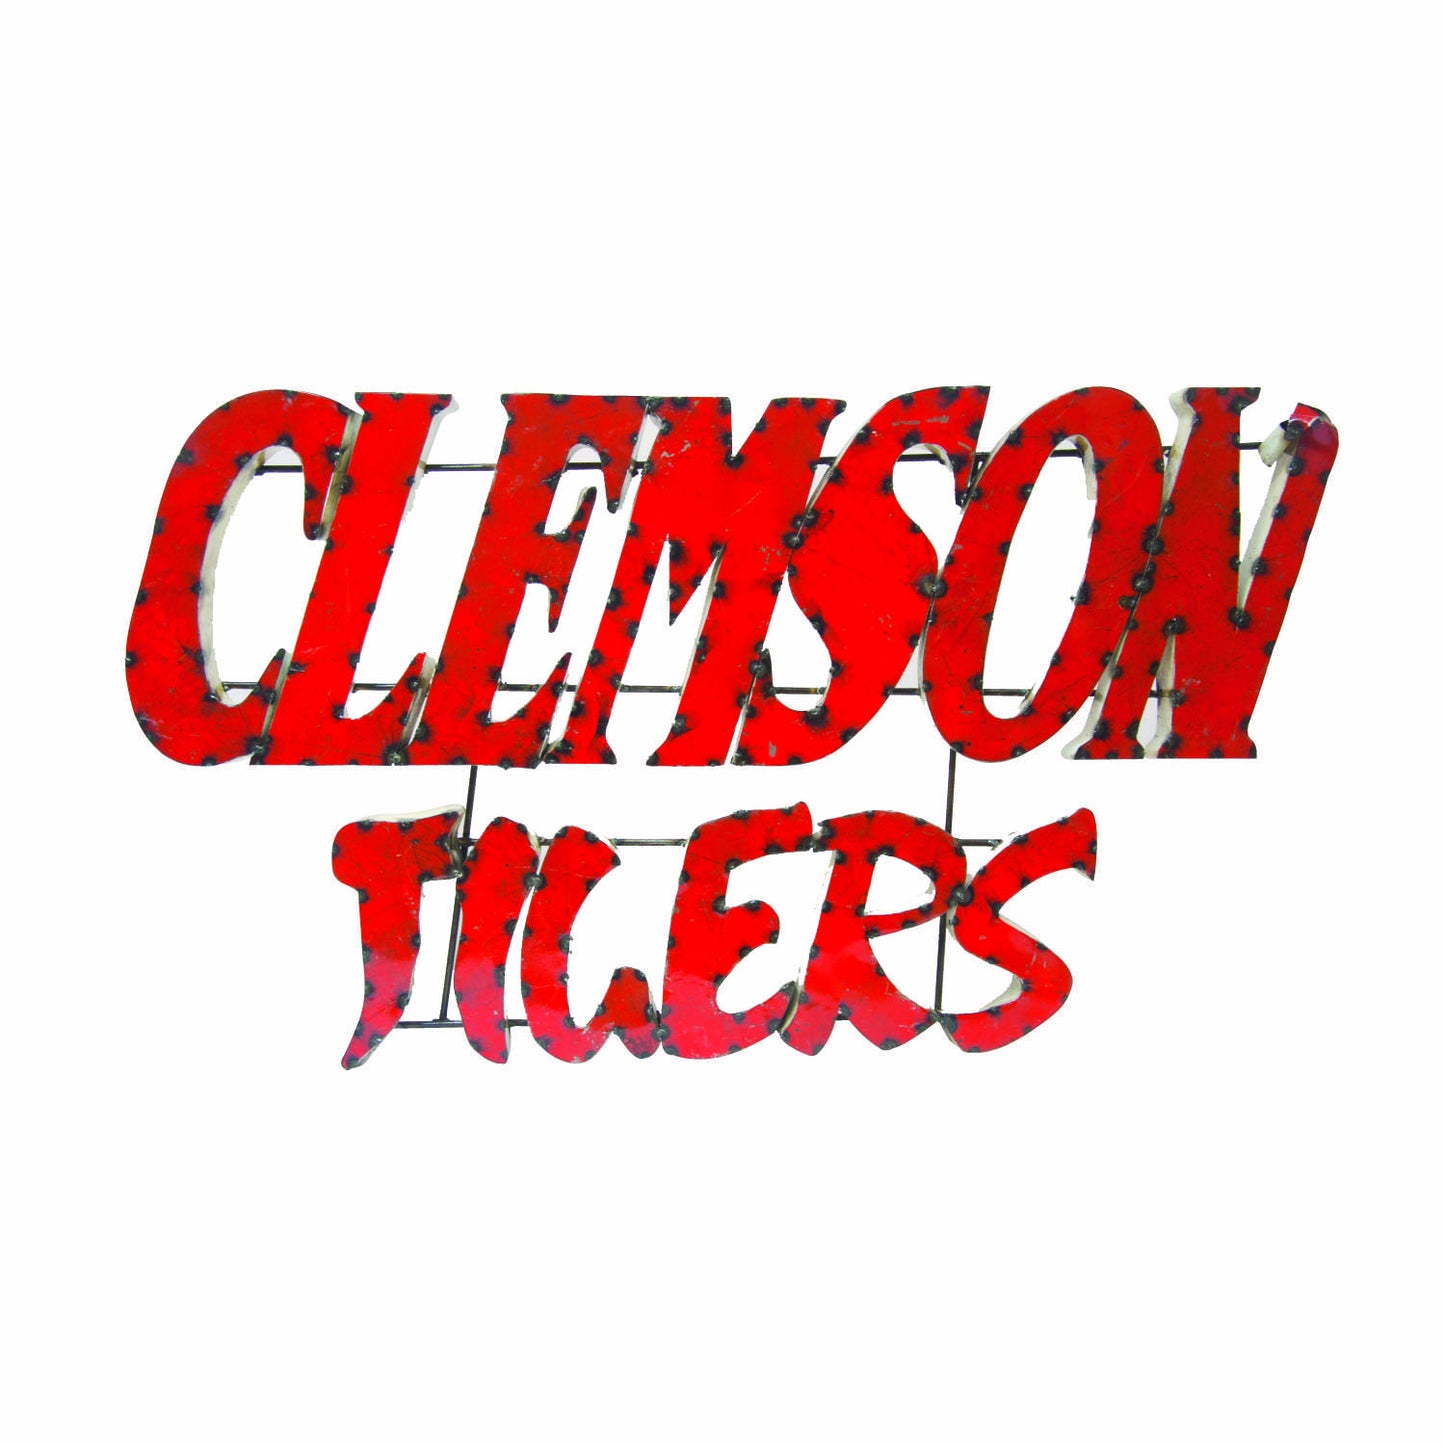 Clemson University "Clemson Tigers" Stacked Recycled Metal Wall Decor